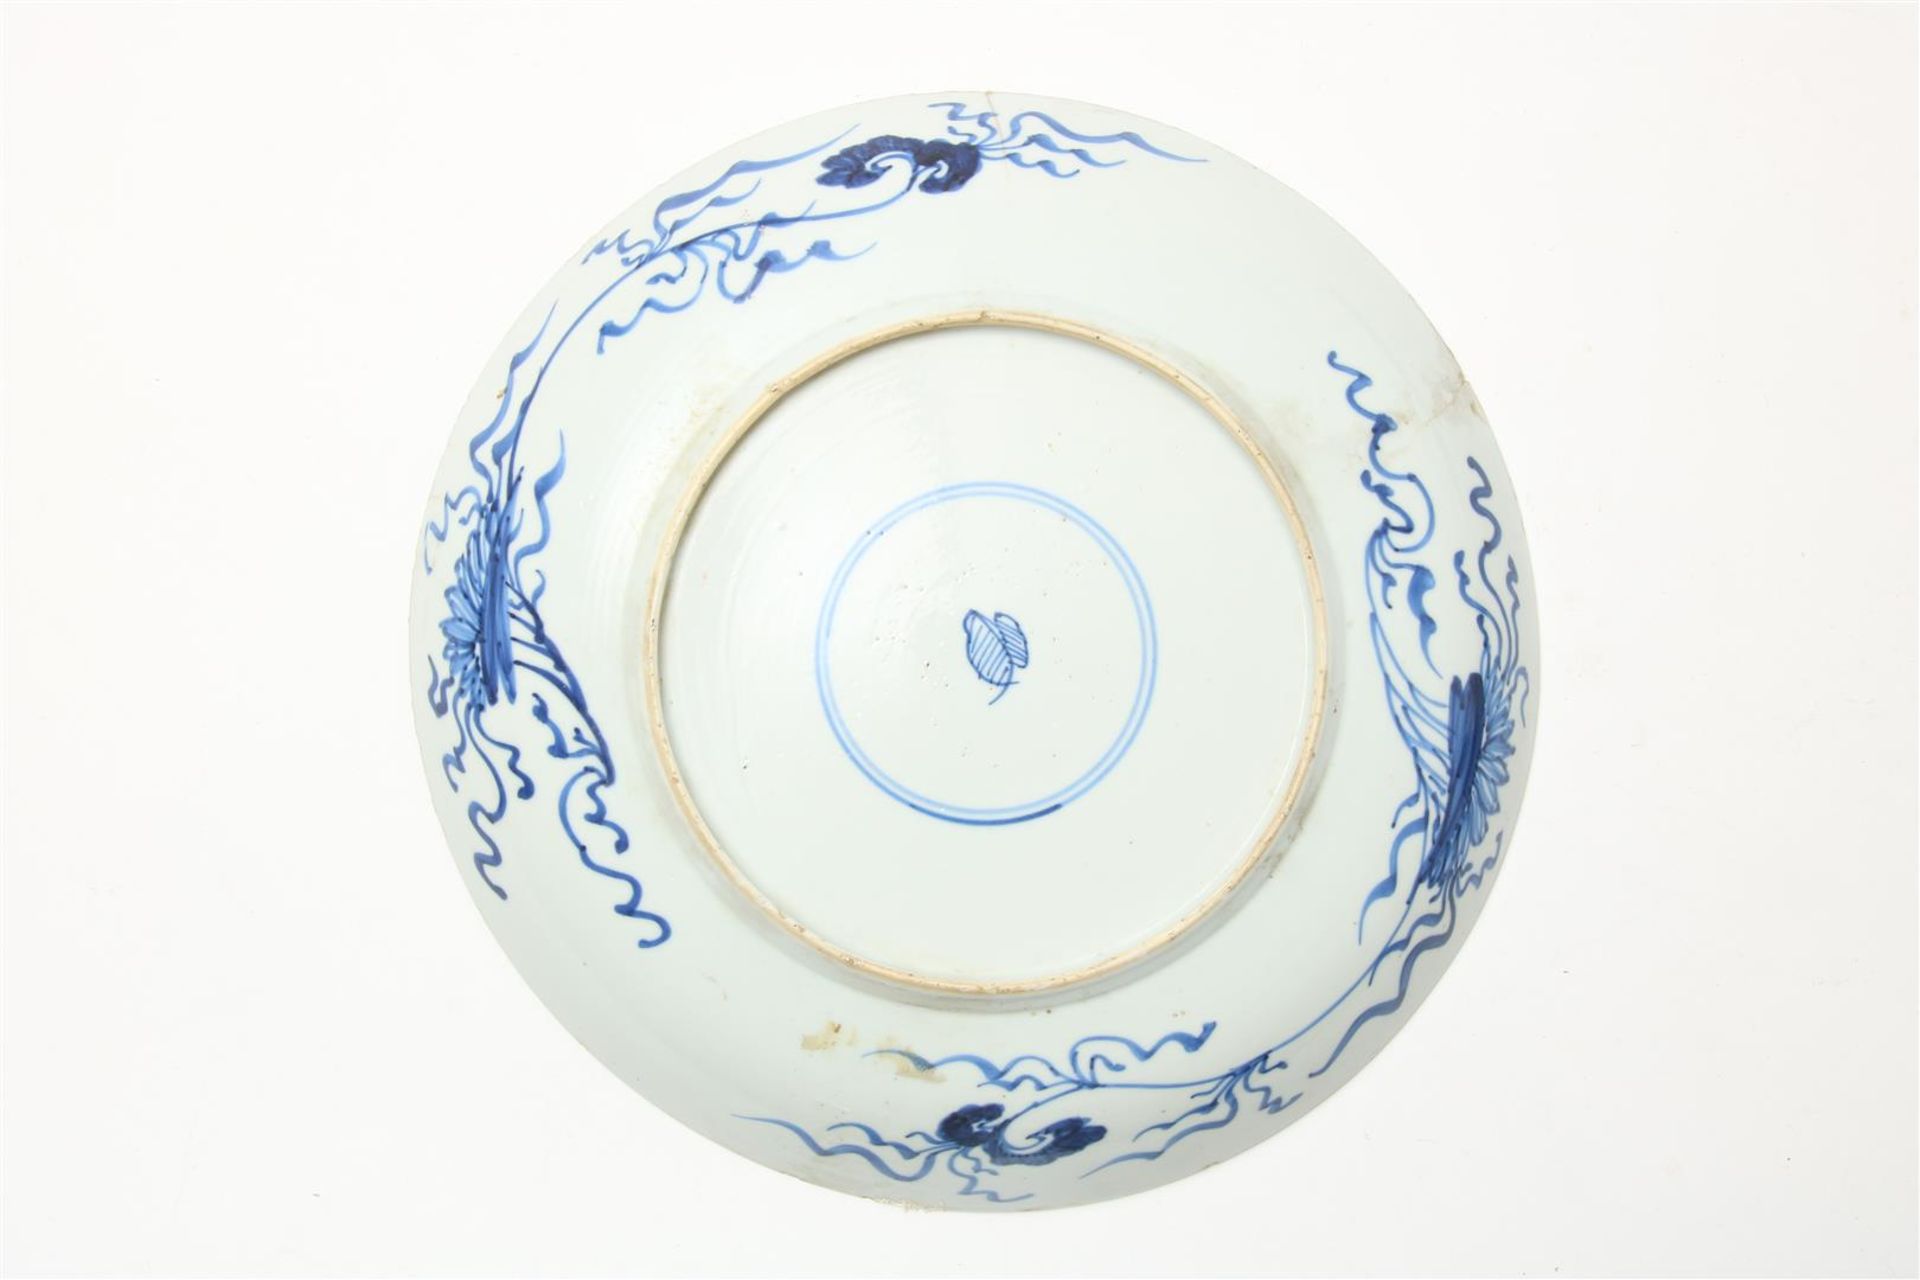 Porcelain Kangxi dish with Aster pattern decor, mark with Artemisia leaf, China 18th century, - Image 3 of 4